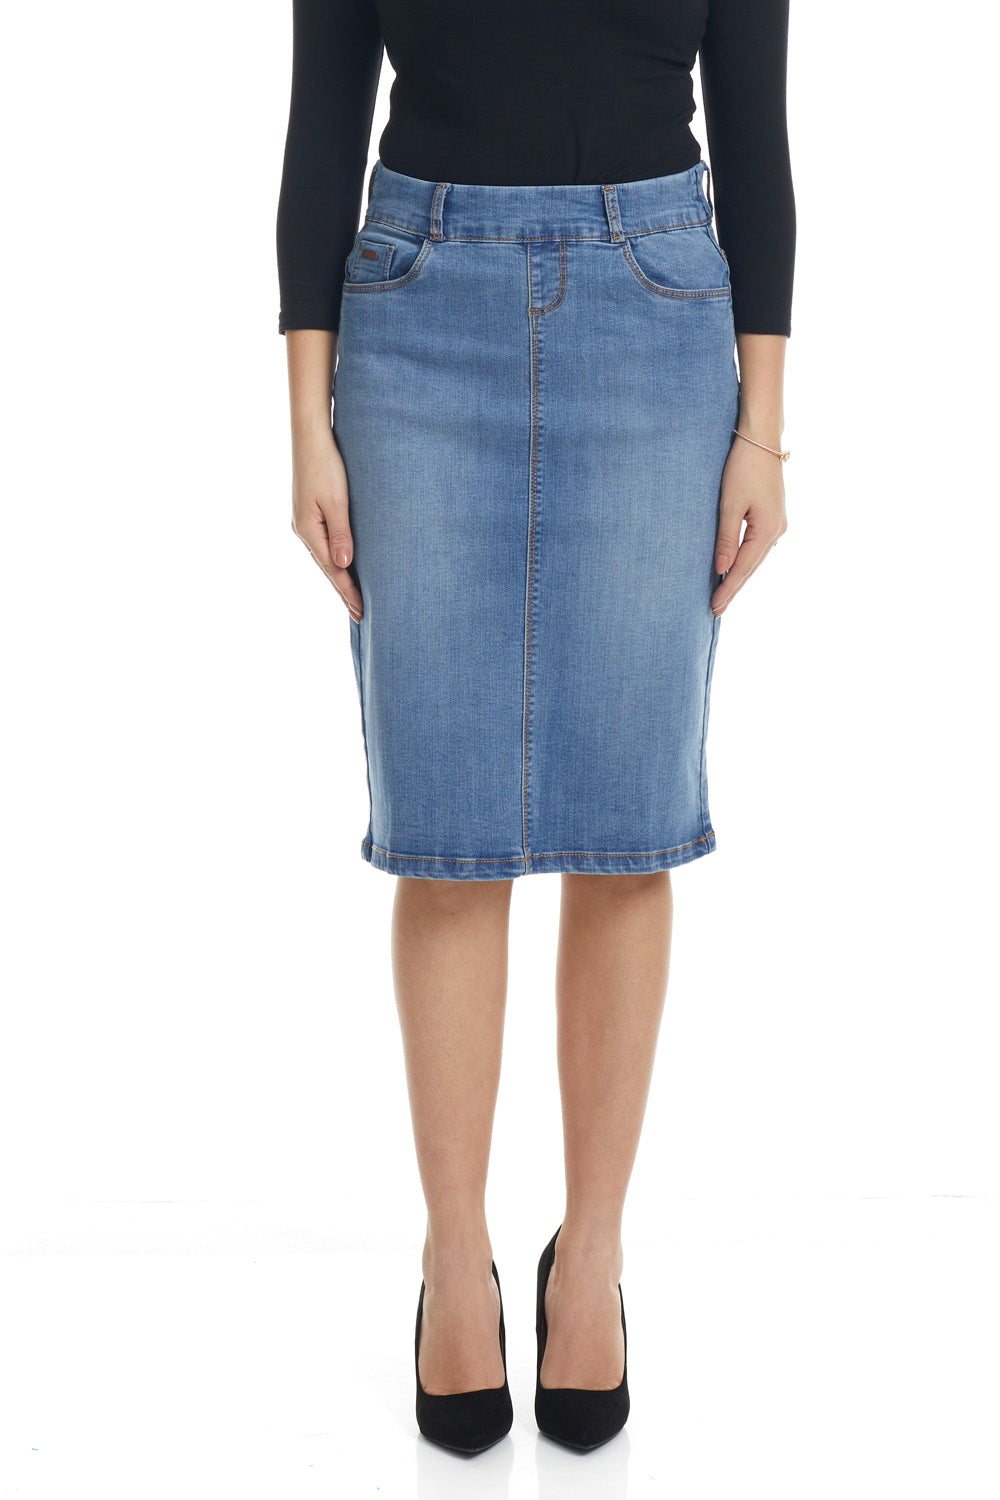 modest blue below knee length straight jean skirt with front and back pockets